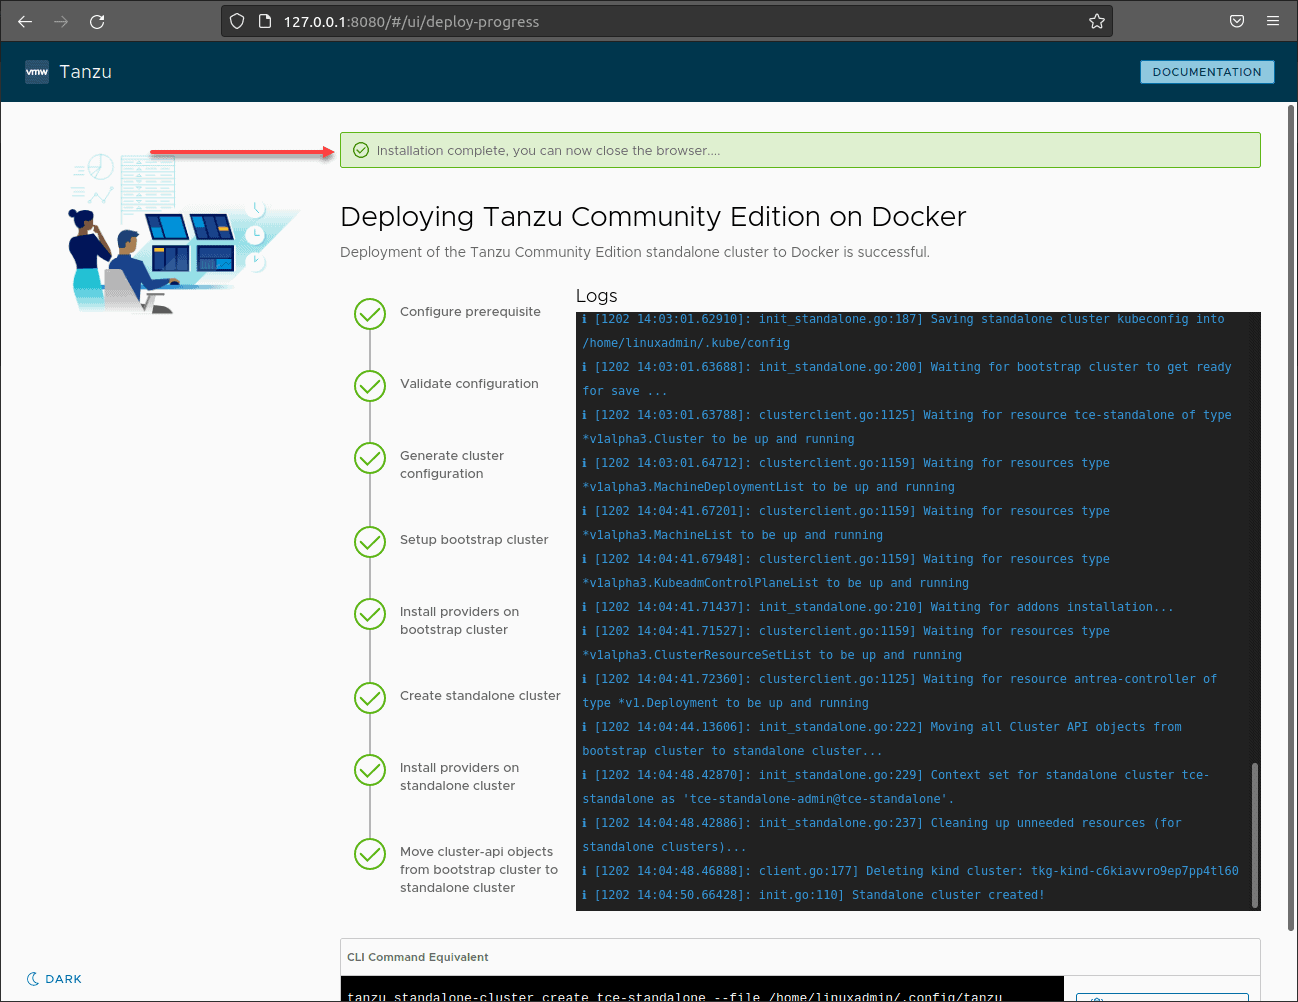 The Tanzu Community Edition standalone cluster deployment finishes successfully